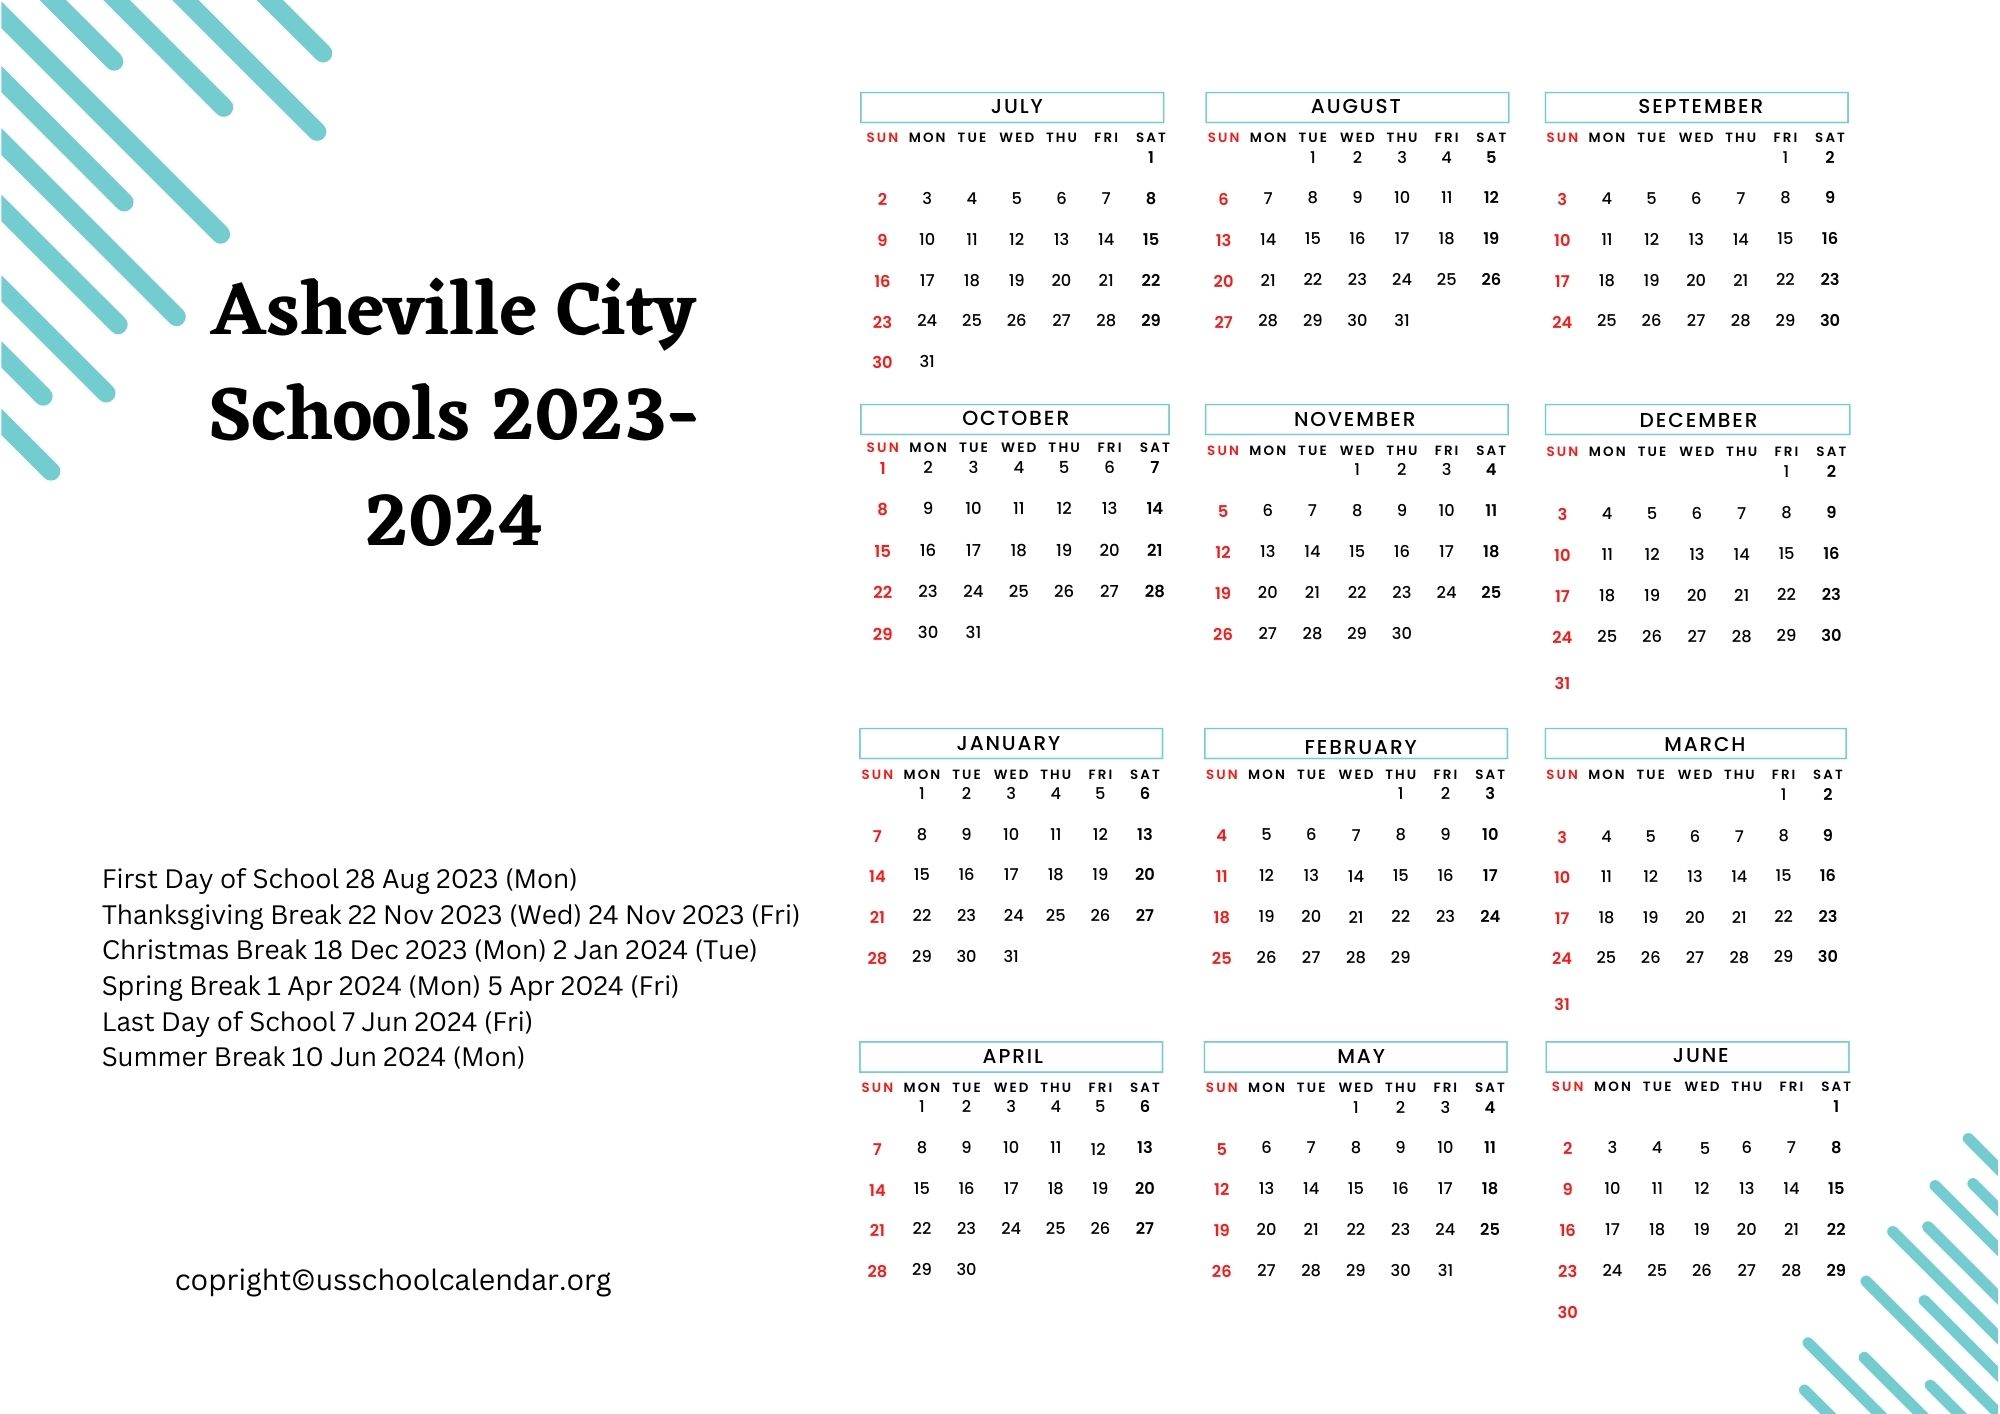 Asheville City Schools Calendar with Holidays 2023 2024